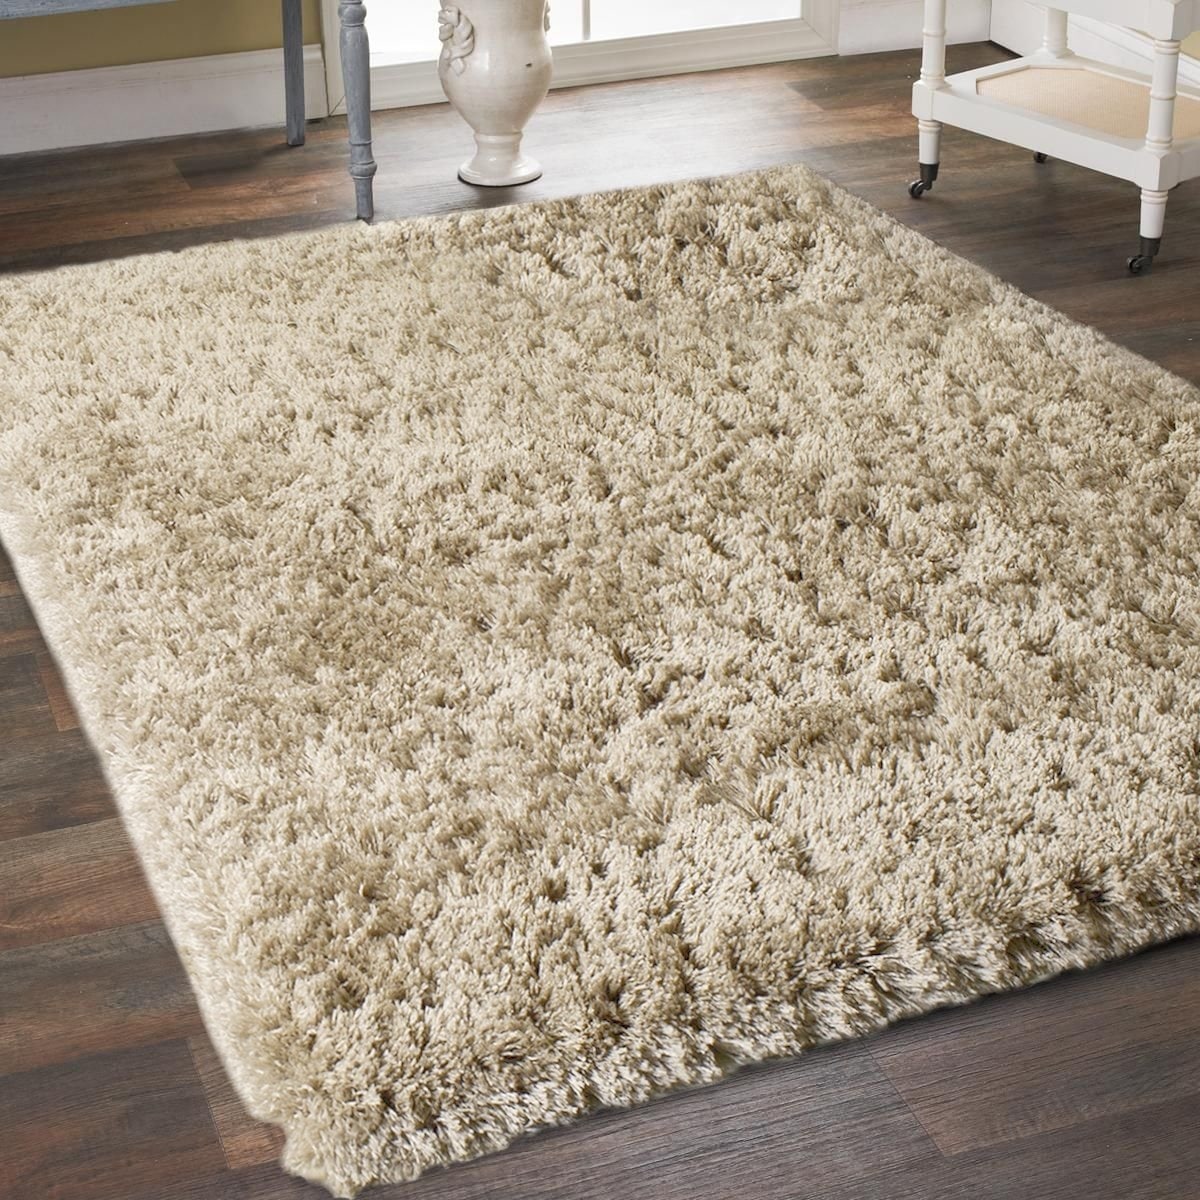 Serenity Supersoft Chunky Shaggy Rugs Crushed Velvet Look Silver 80x150cm 